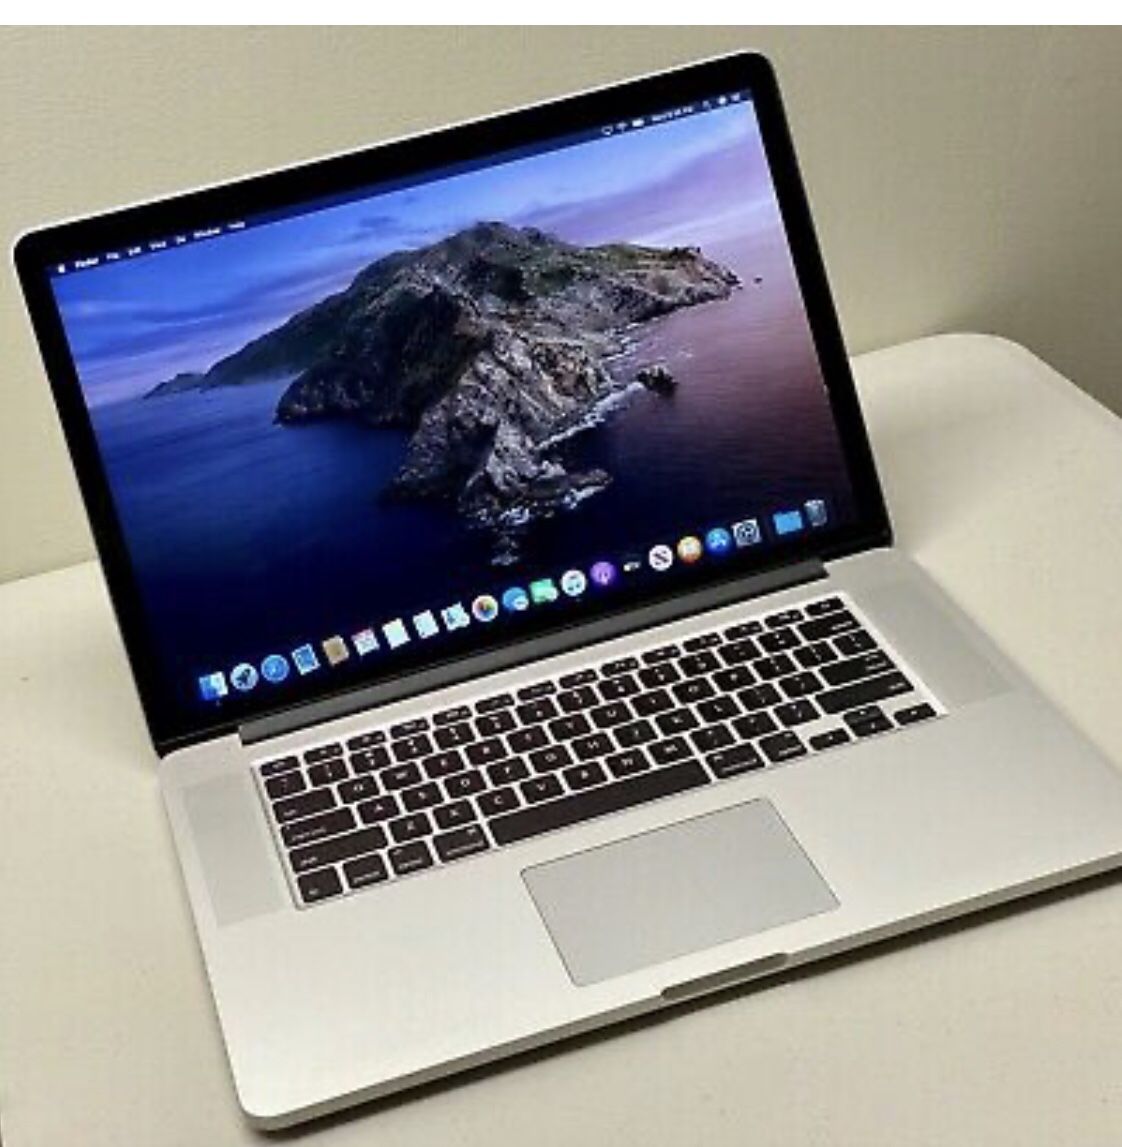 500 SSD hard drive, 16gigs ram Retina thin 4K MacBook Pro i7 15” like new with hdmi Its in excellent condition super fast with Charger no dent no